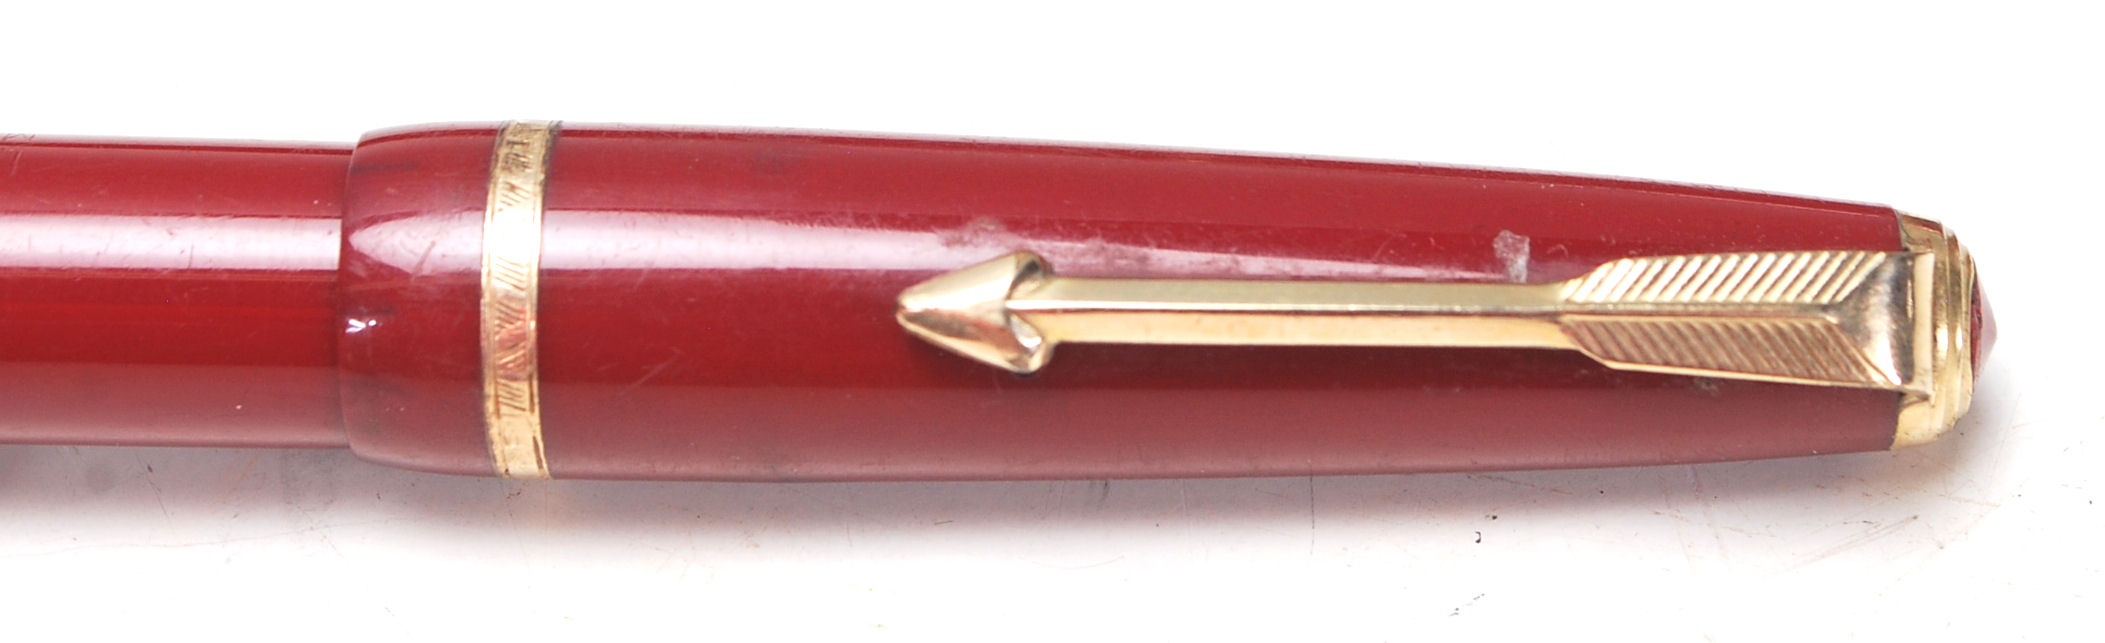 COLLECTION OF FOUR VINTAGE FOUNTAIN PENS - Image 3 of 7